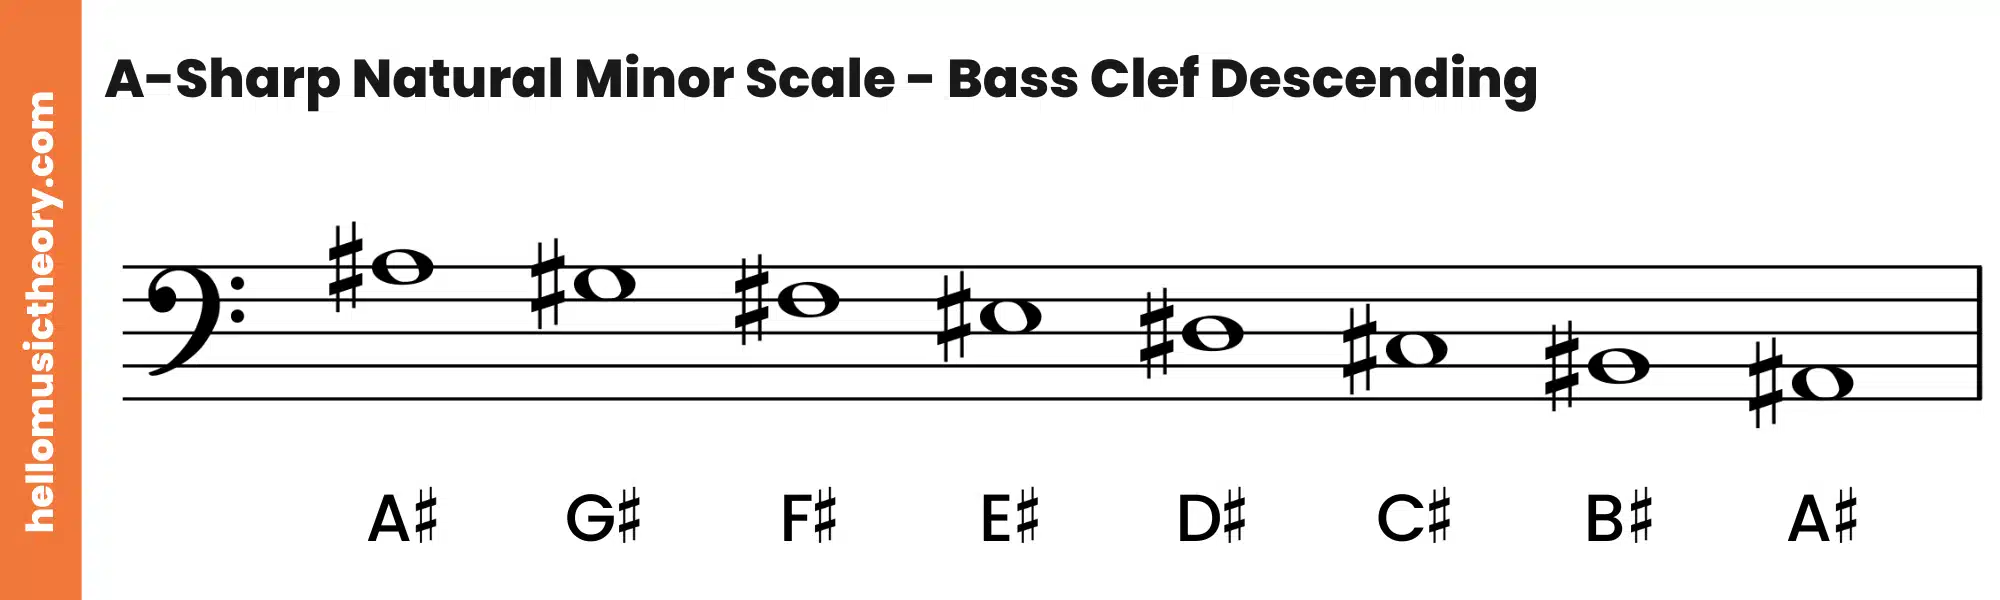 A-Sharp Natural Minor Scale Bass Clef Descending